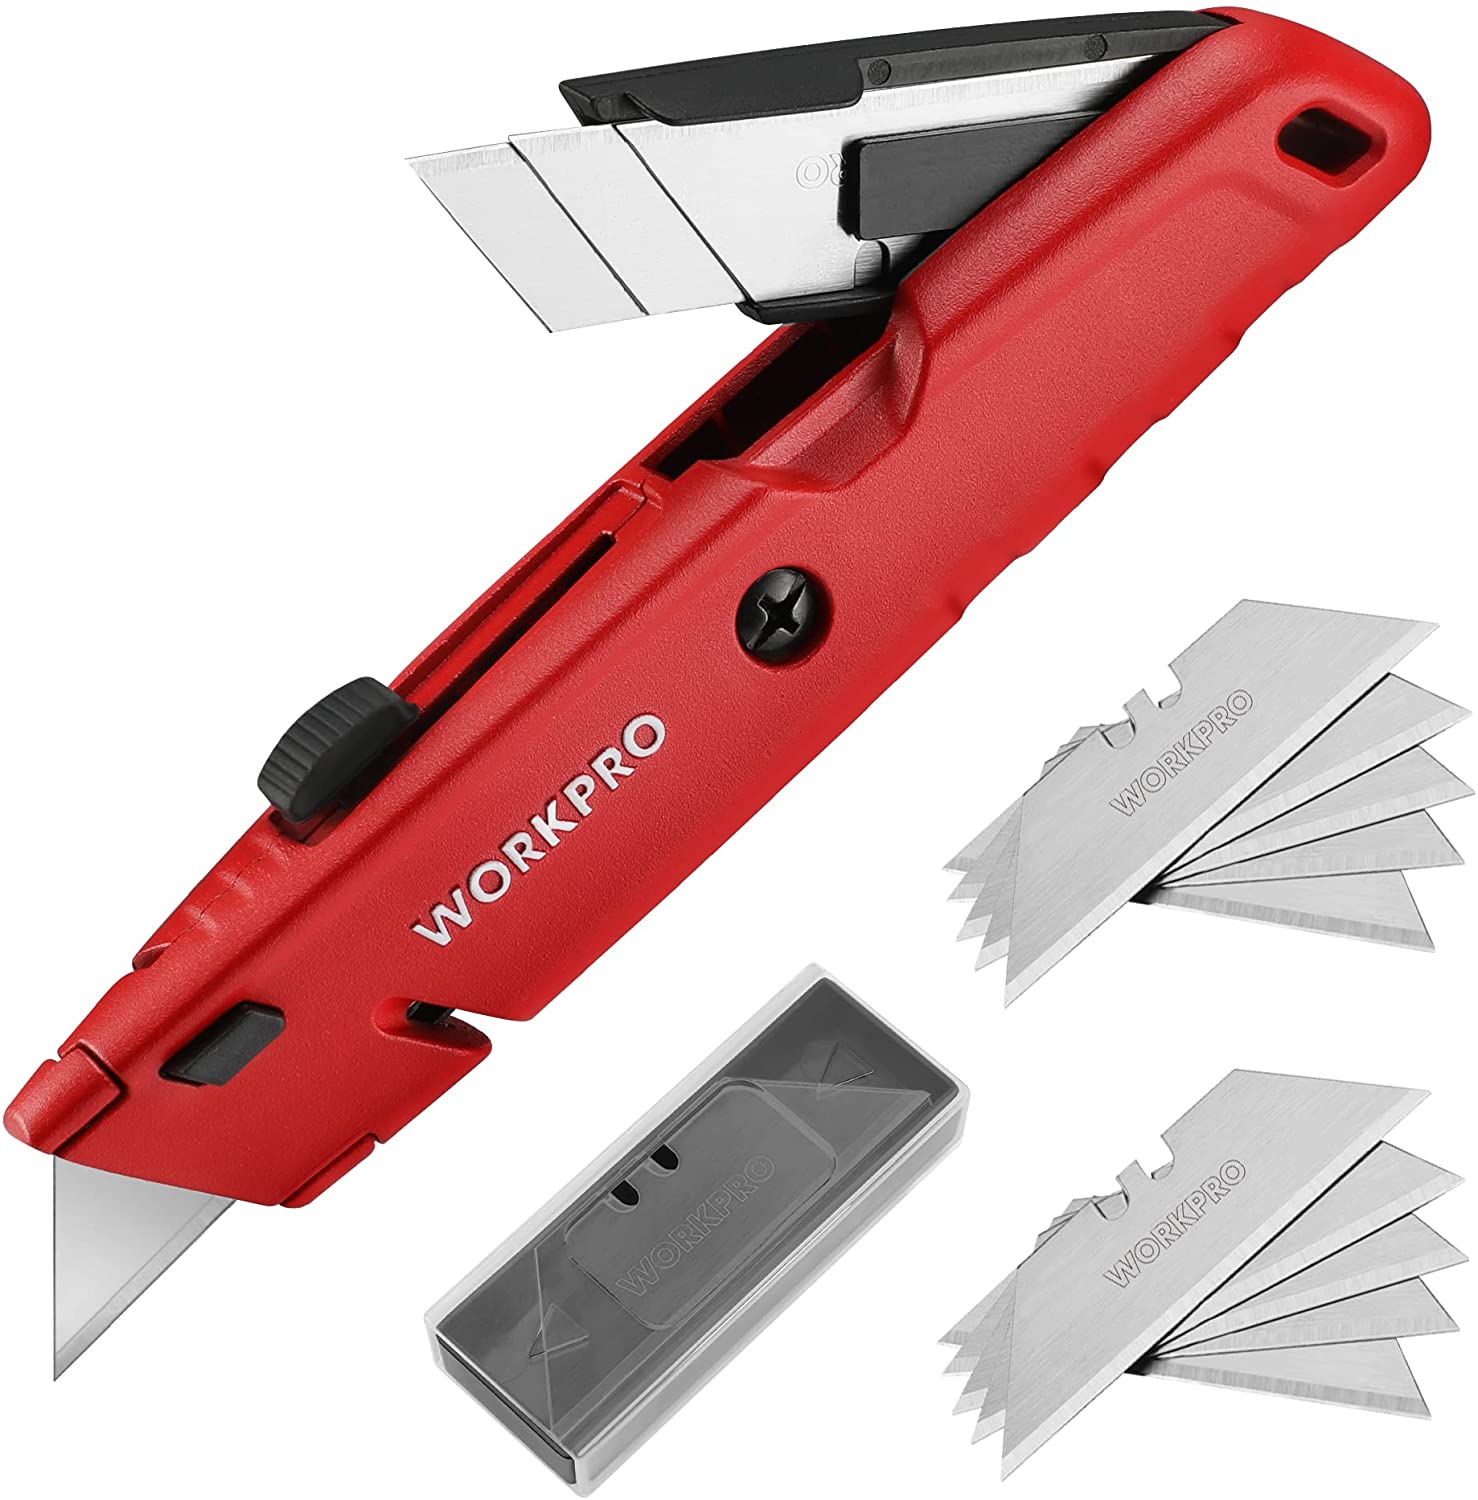 WorkPro Retractable Box Cutter, Quick Change Utility Knife with Extra Blade Storage - Heavy Duty Aluminum Razor Knife, Twine Cutter, Bonus SK5 Blades